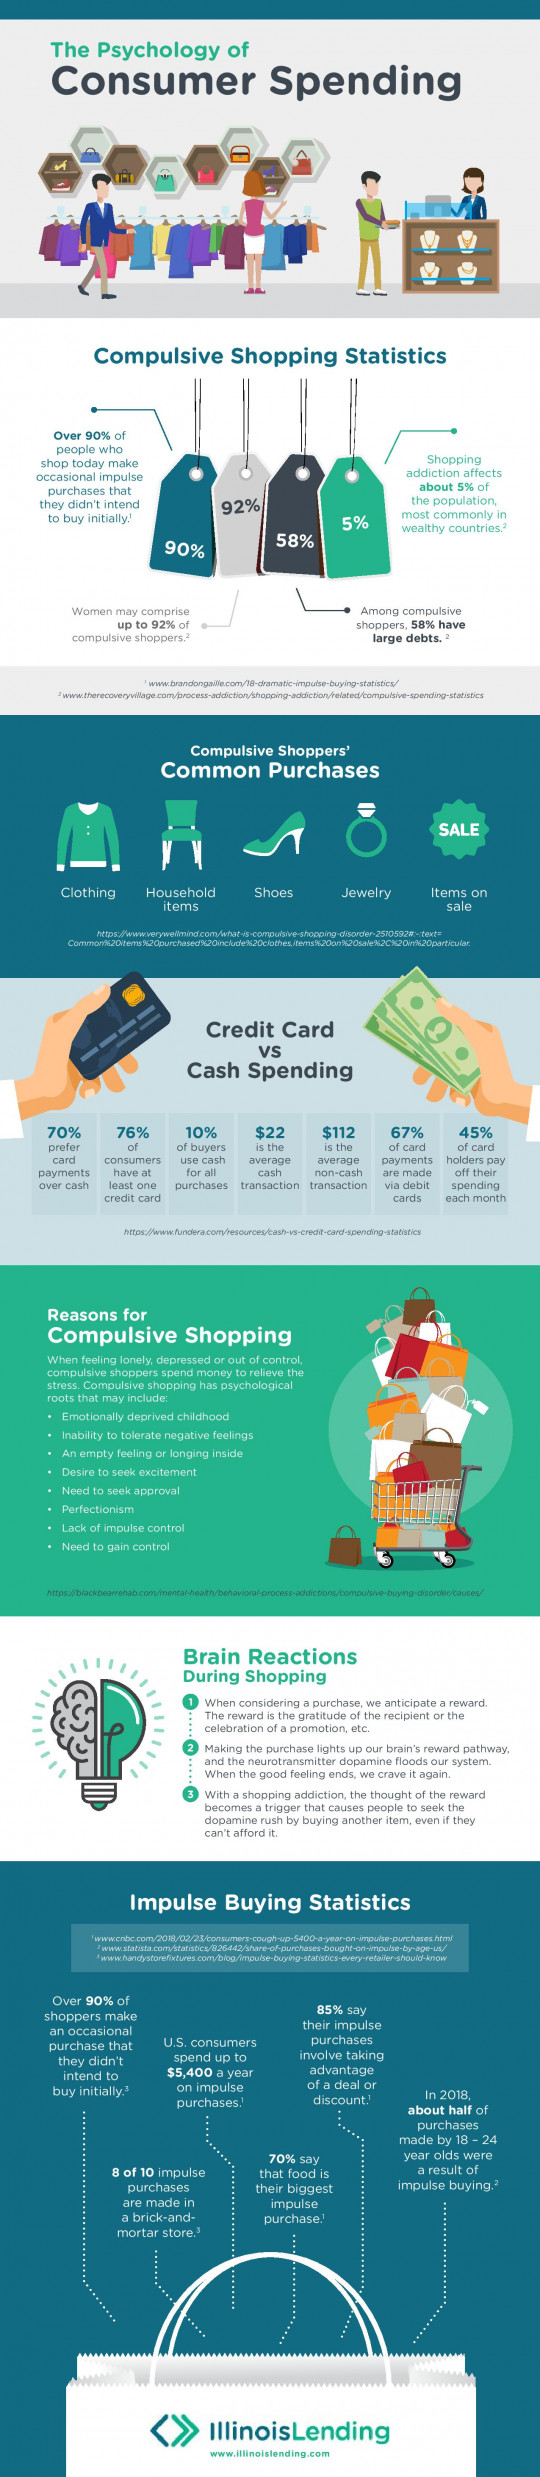 The Psychology of Consumer Spending